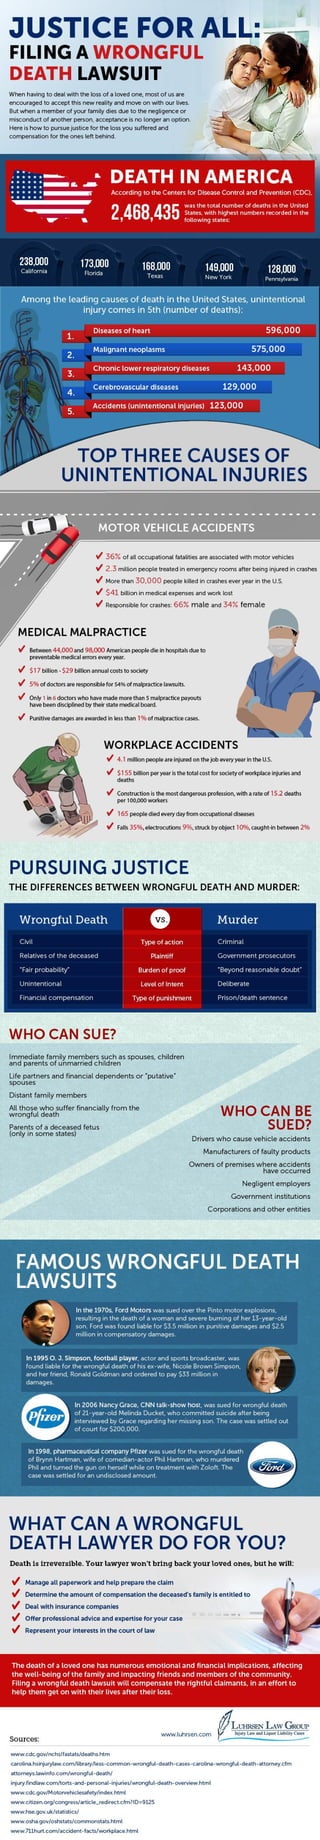 Justice for All: Filing a Wrongful Death Lawsuit 